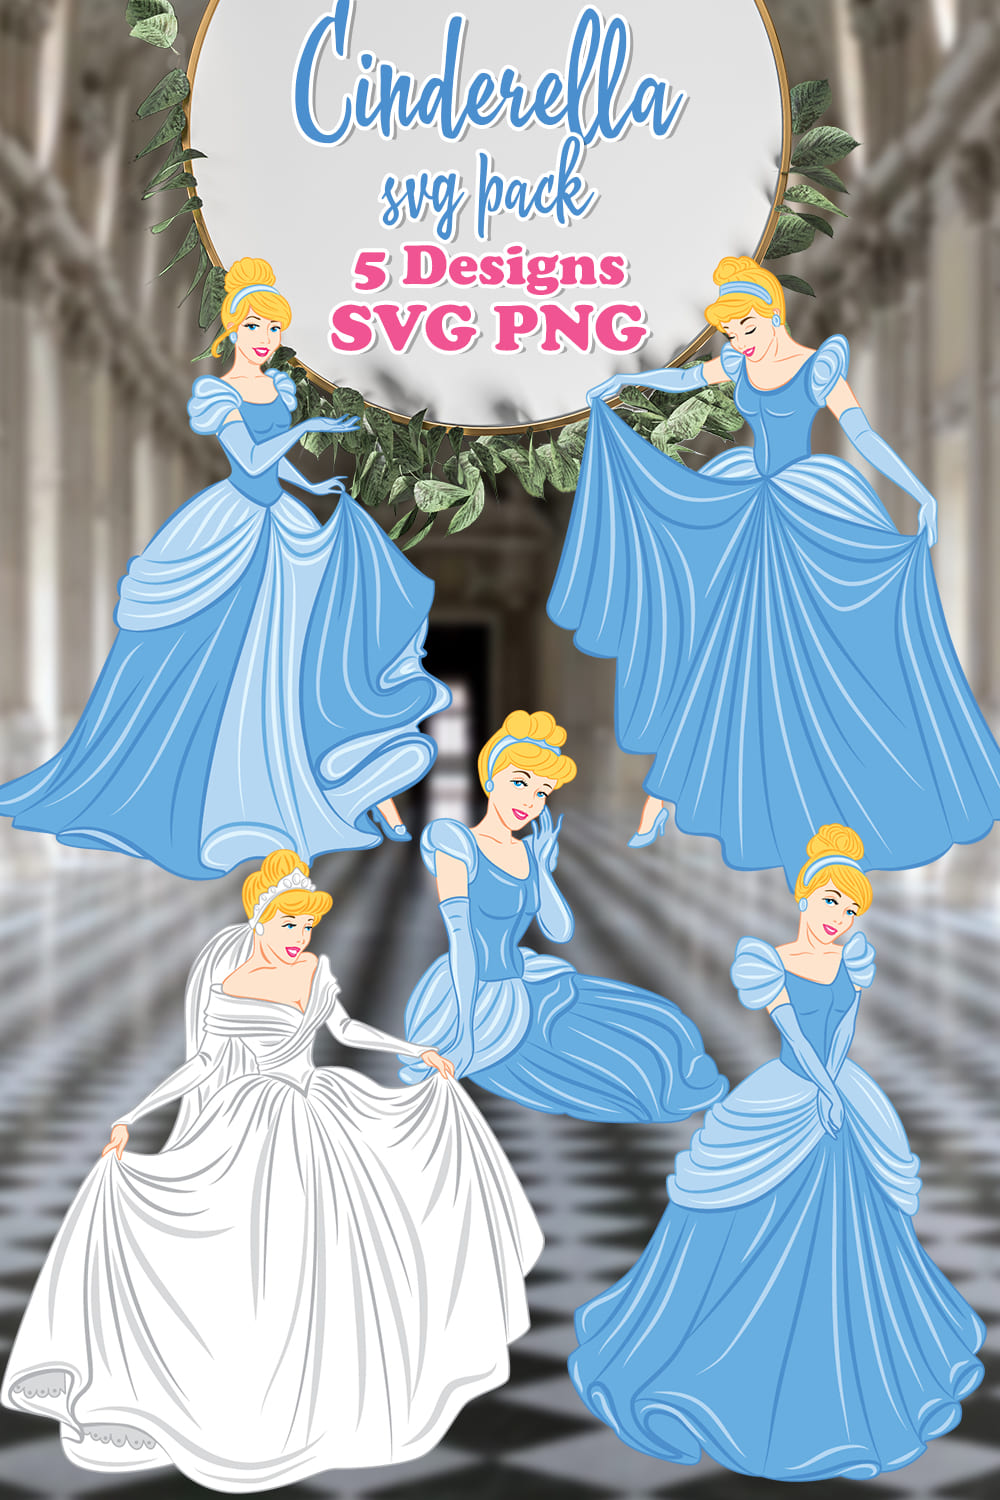 Cinderella in the different dresses.